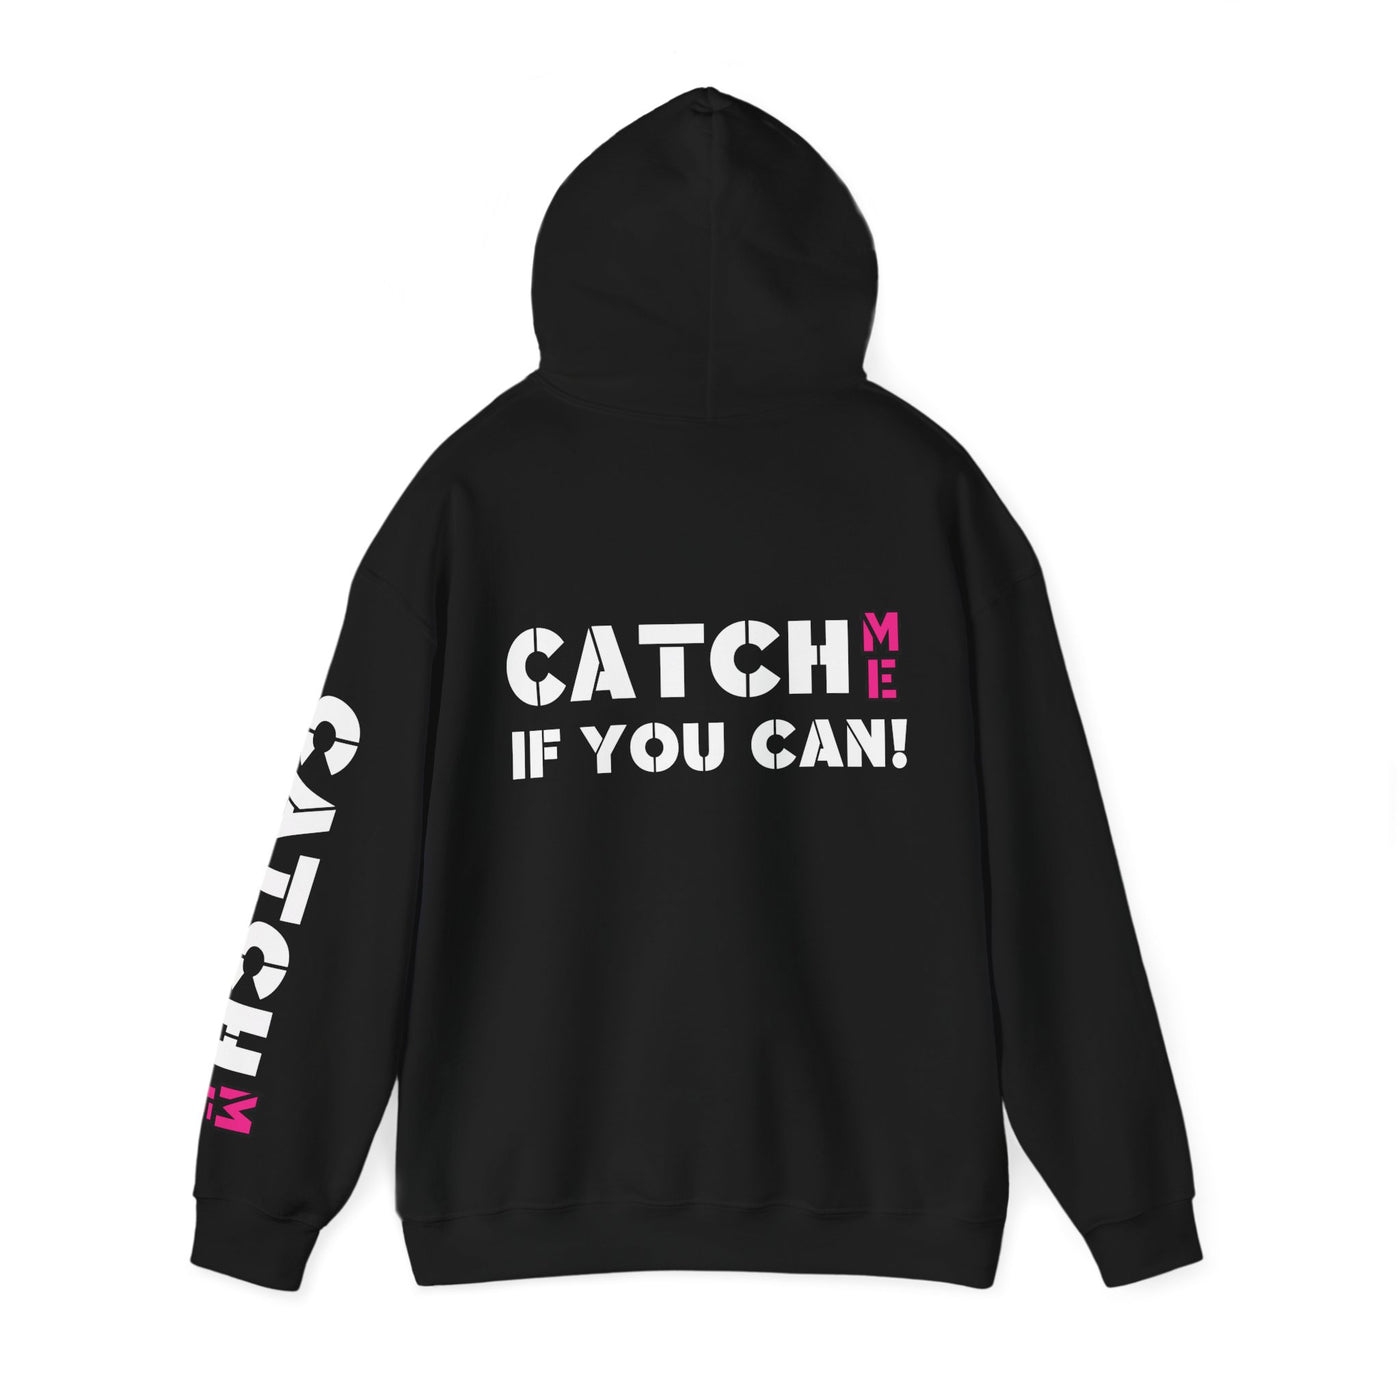 YES I RUN LIKE A GIRL. CATCH ME IF YOU CAN Unisex Heavy Blend™ Hooded Sweatshirt